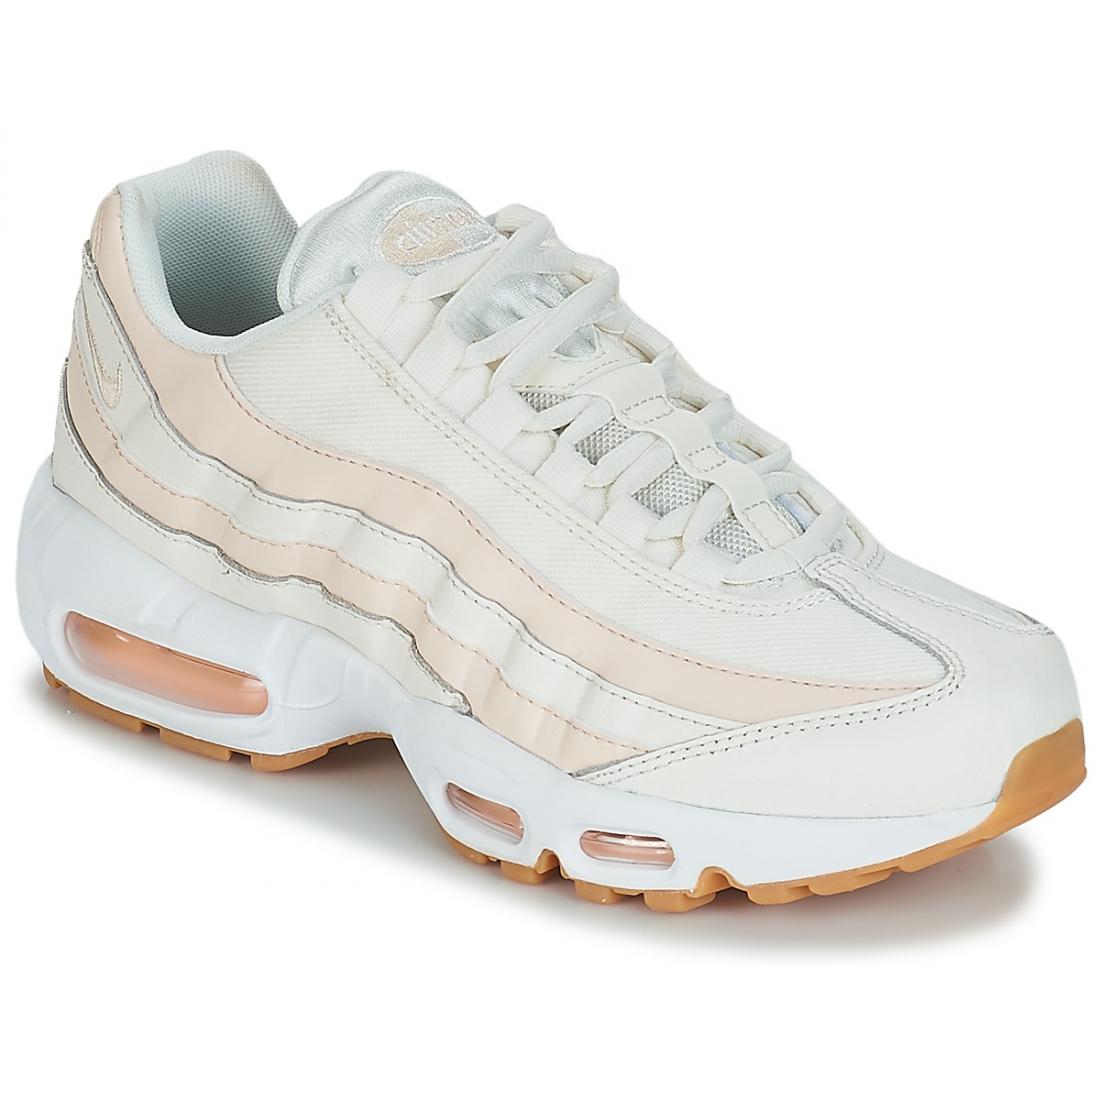 Nike Air Max 95 Beige Femme Sale Online, UP TO 50% OFF